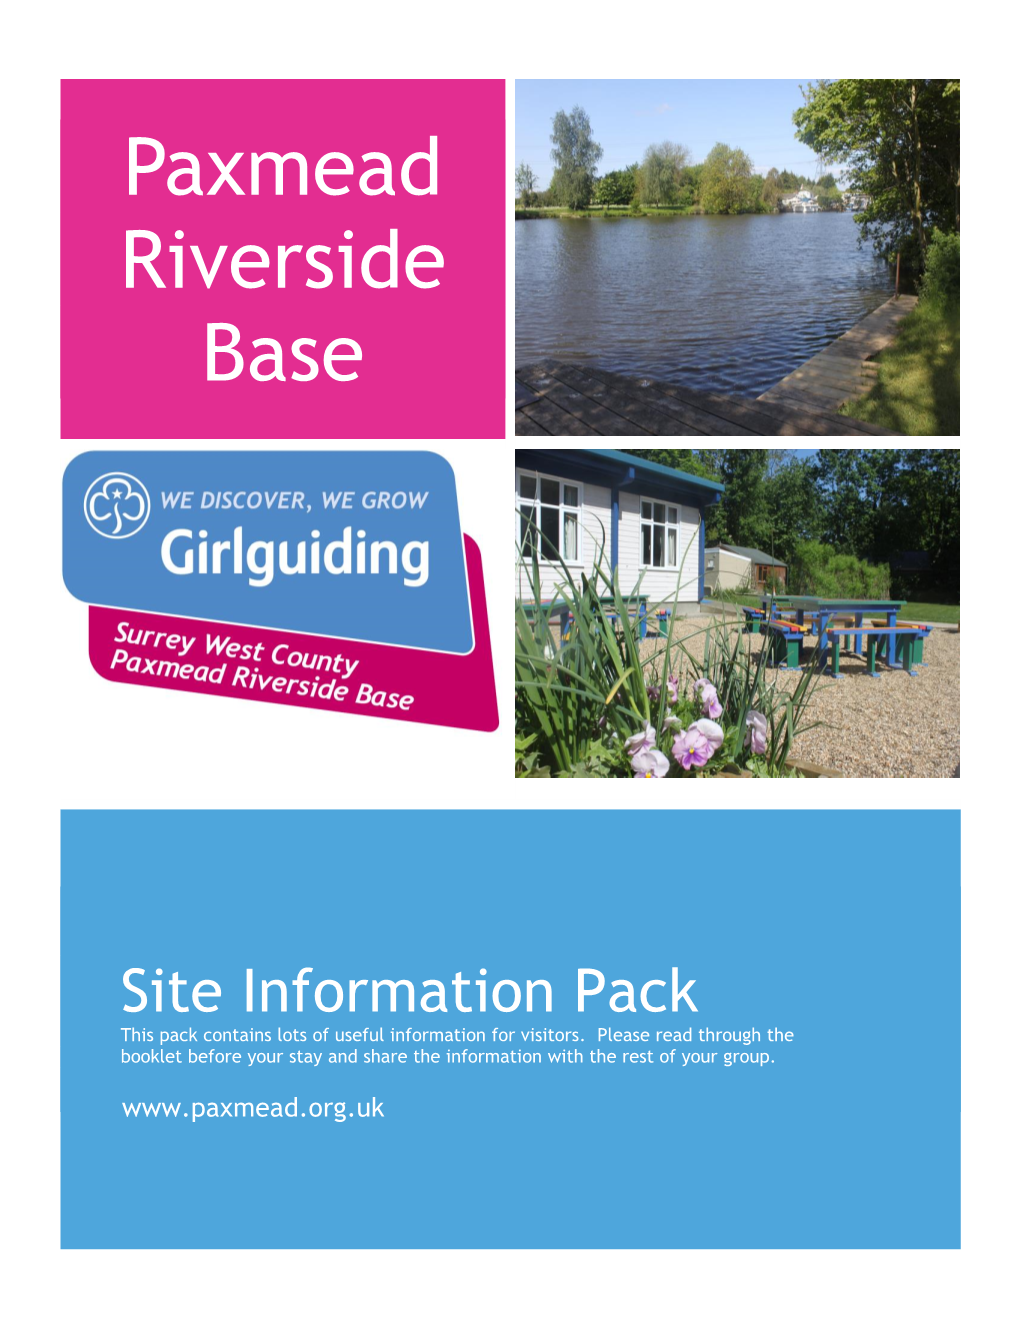 Site Information Pack This Pack Contains Lots of Useful Information for Visitors